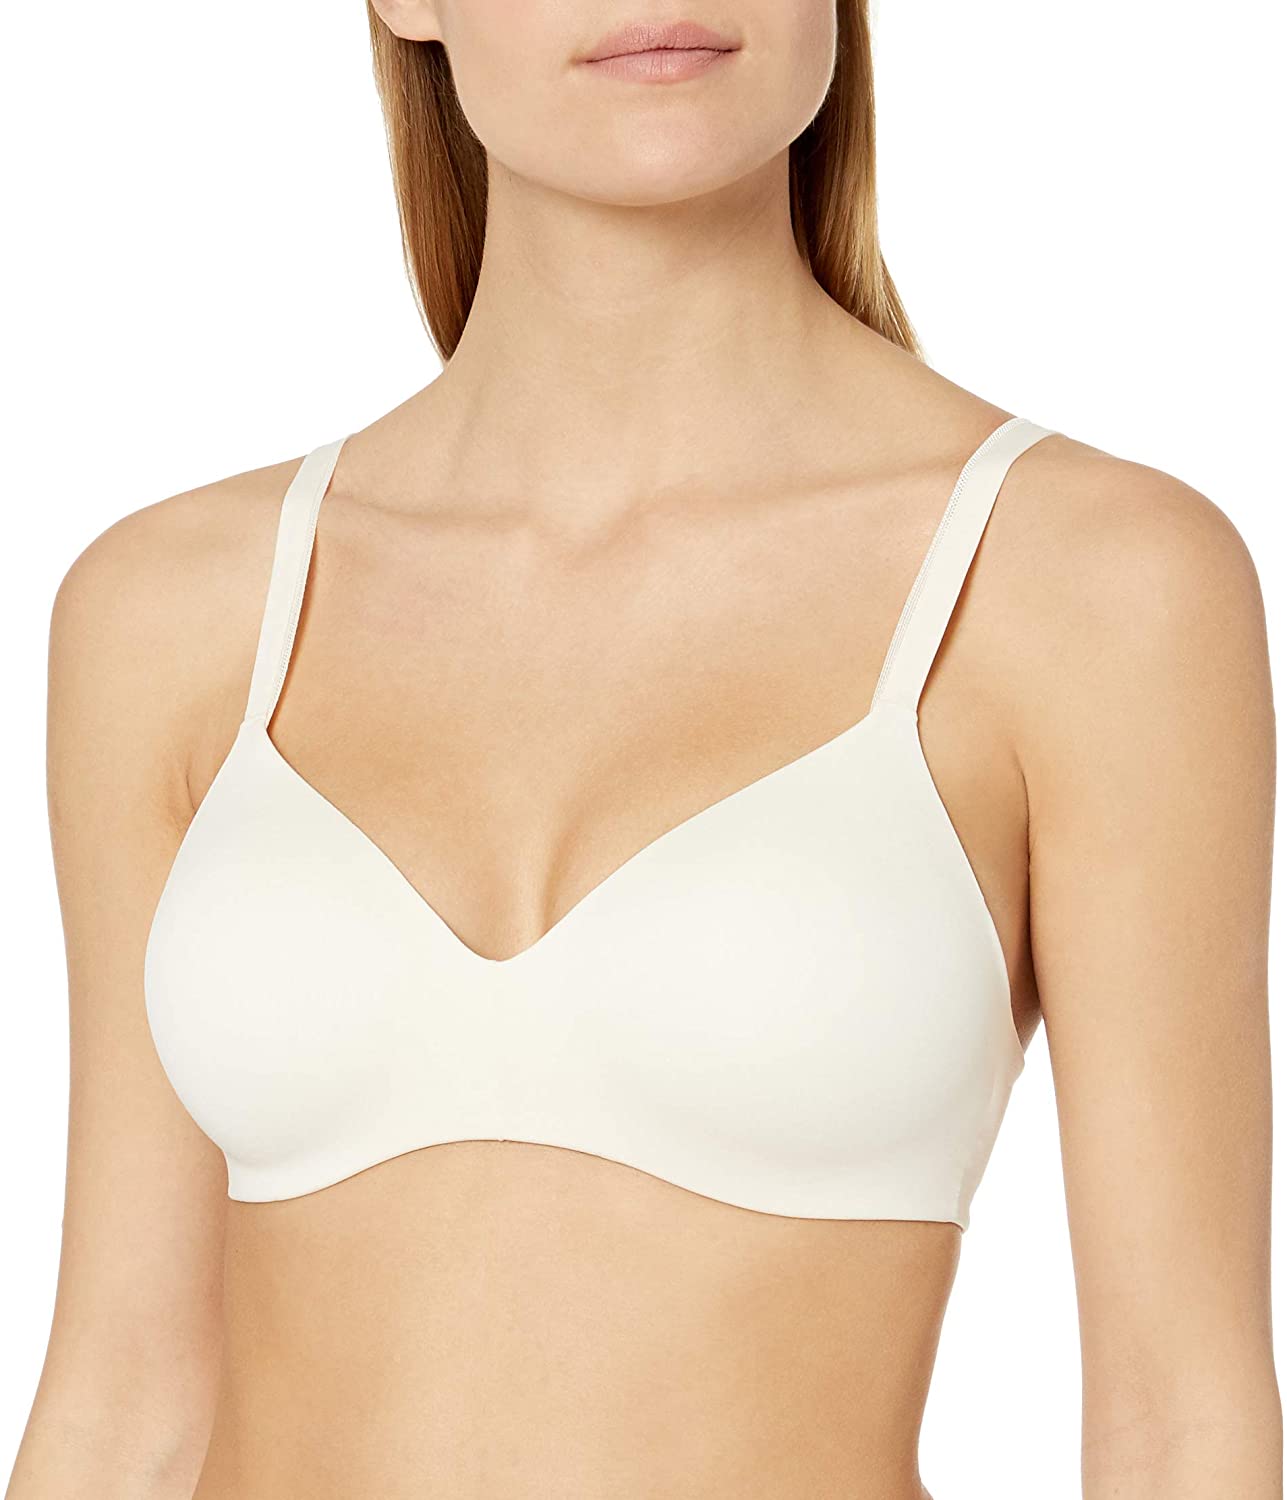 12 best bras for large busts herstylecode 1 12 Best Bras for Big Busts 2022 - Top Rated Bras for Bigger Busts